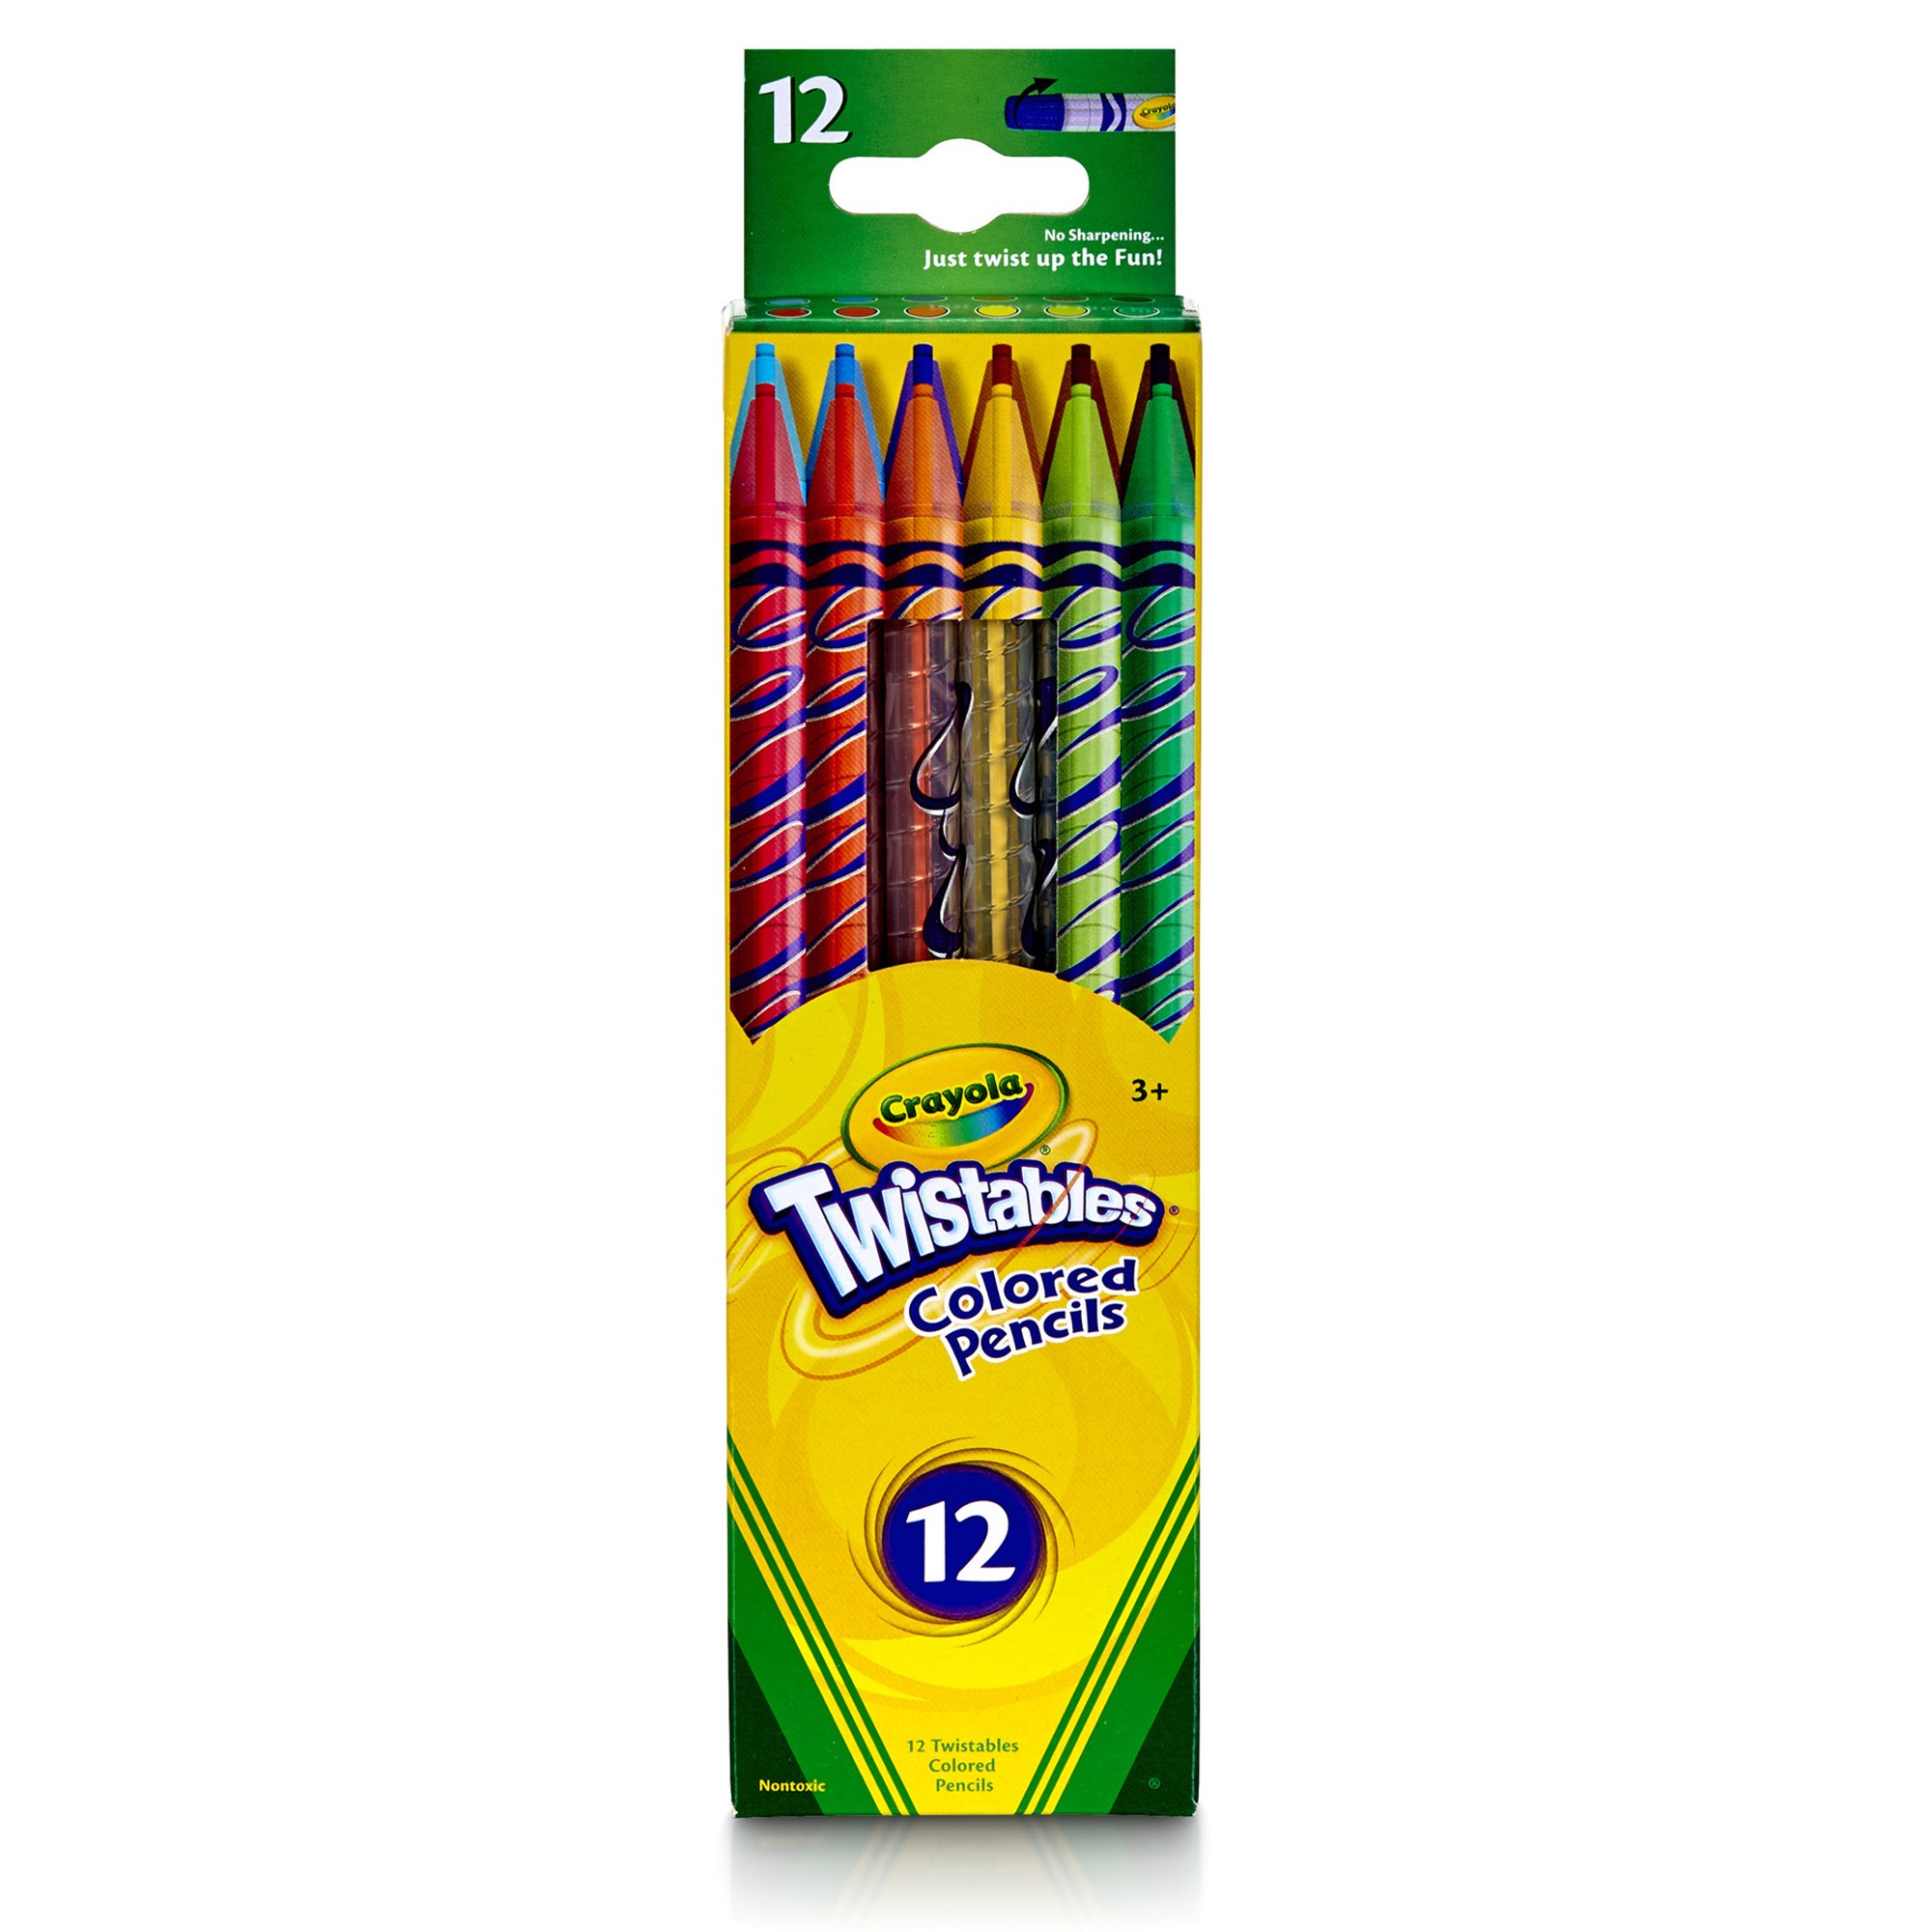 Twistables Colored Pencils, 12 Count